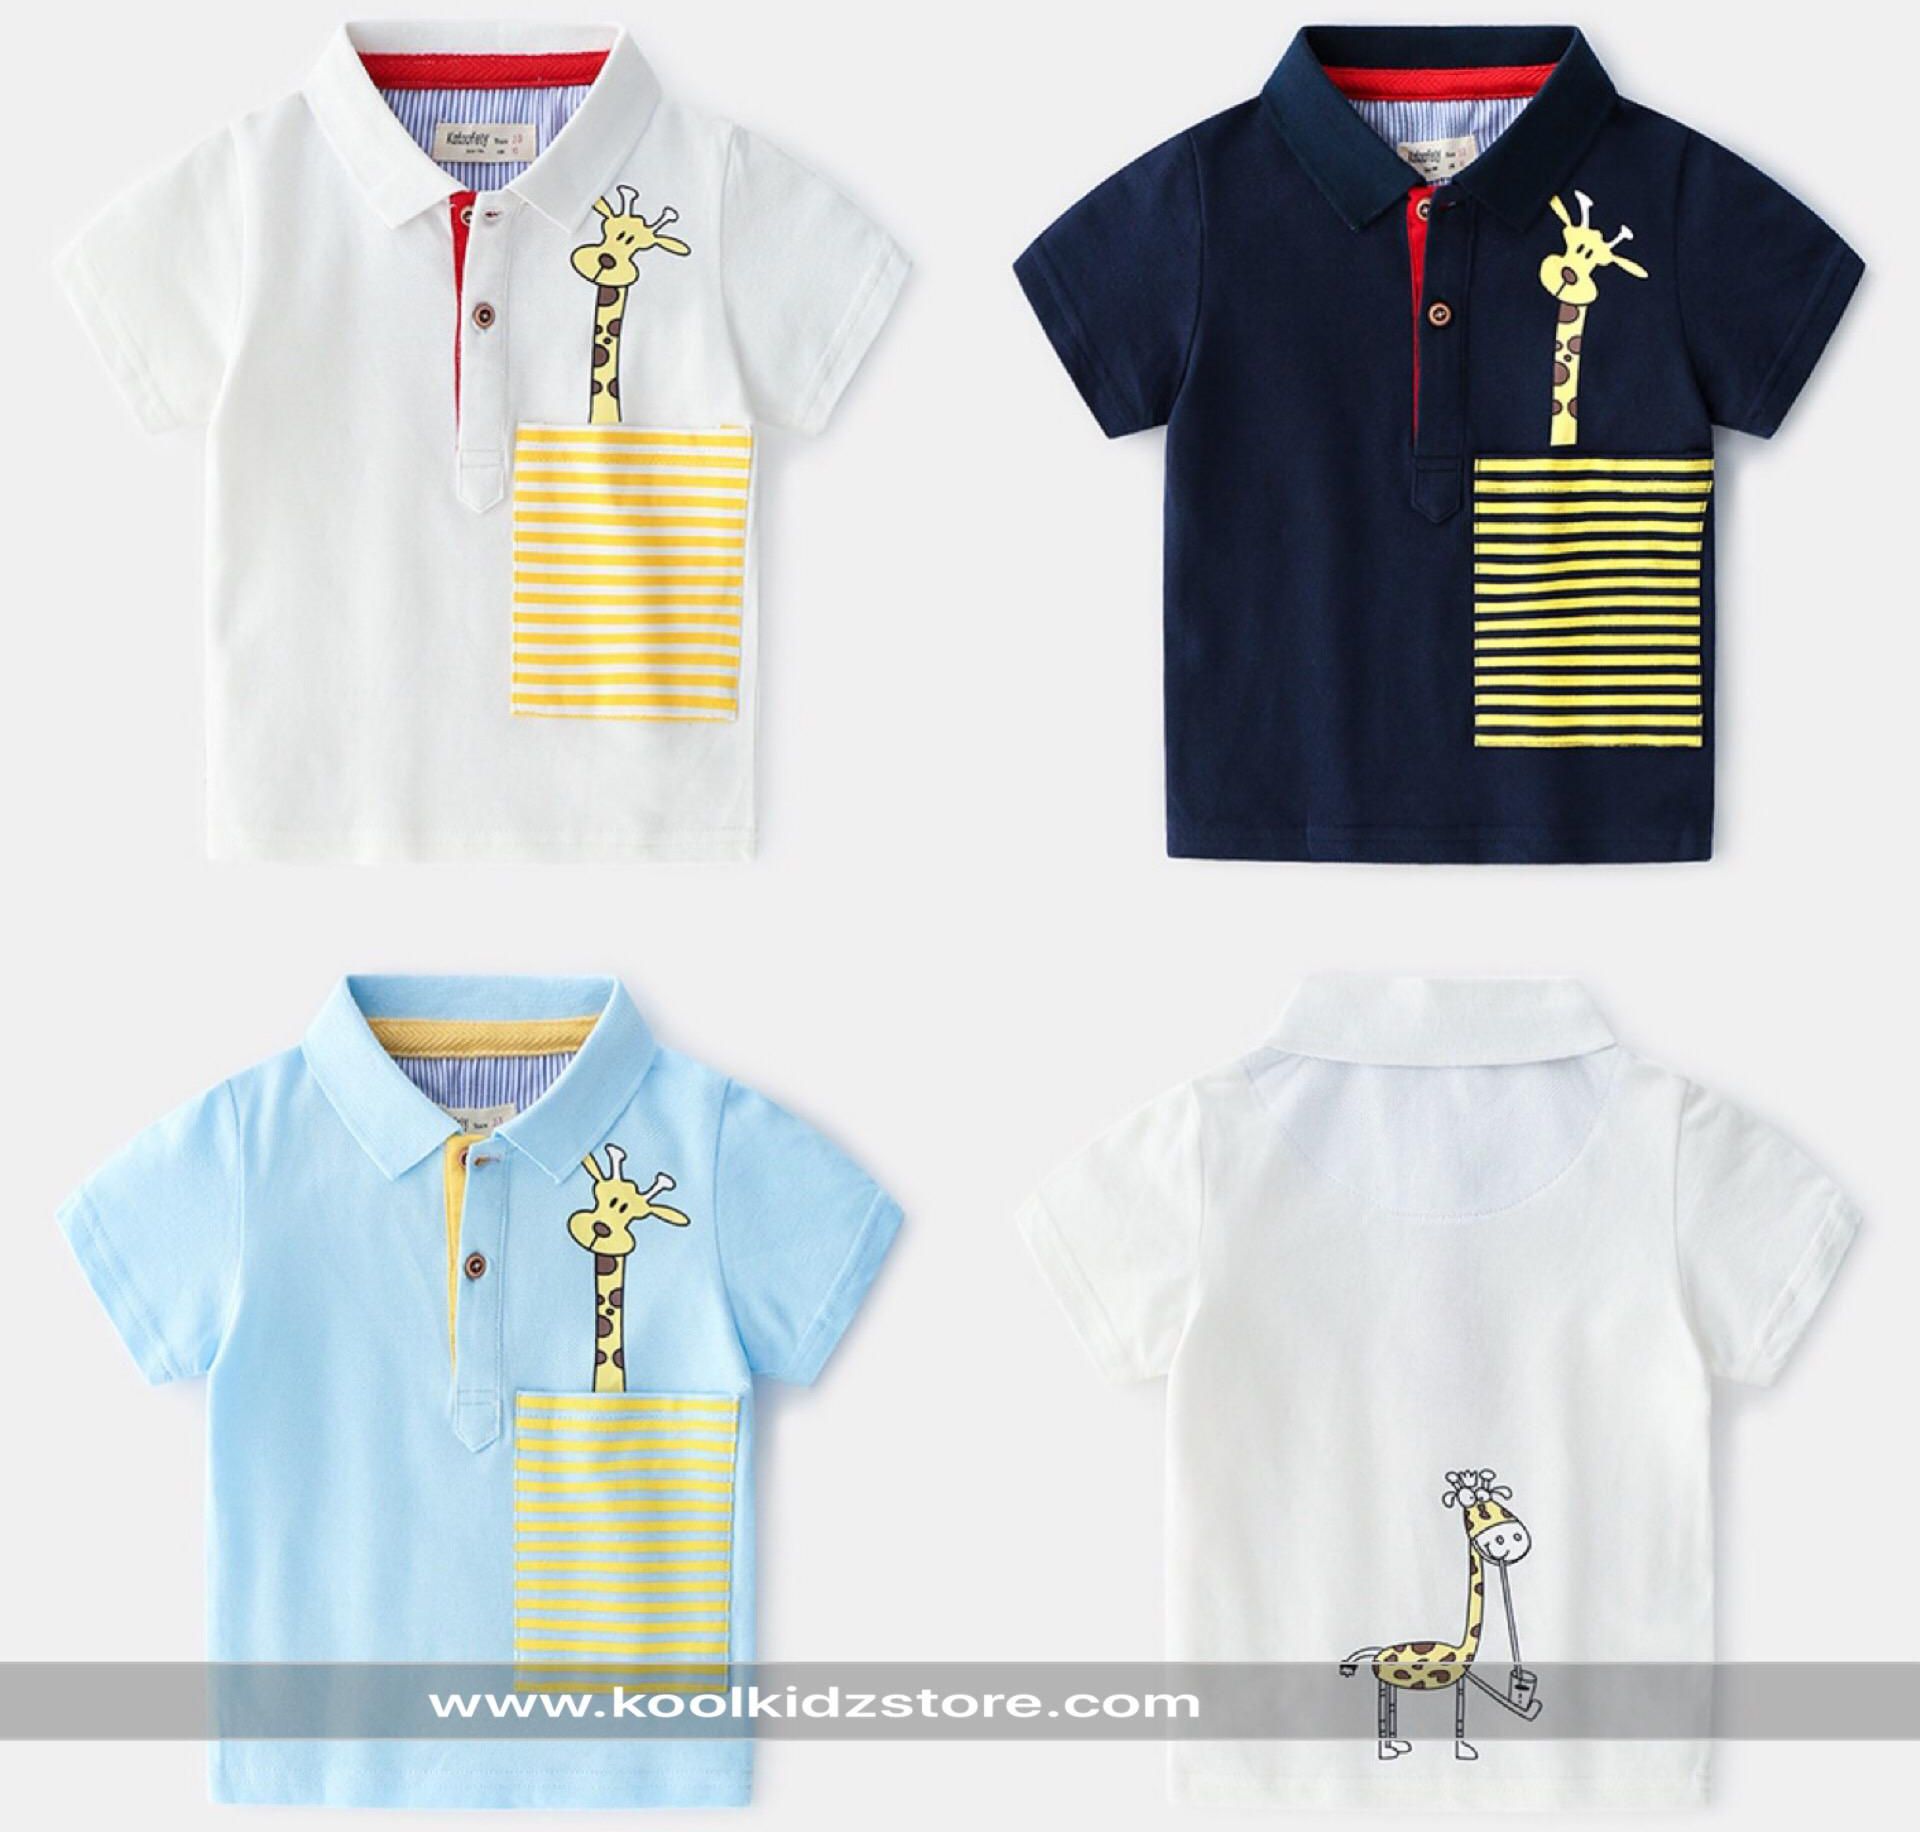 Koolkidzstore Polo T-Shirts Giraffe Printed For Boys 2-8Y (3 Colors)